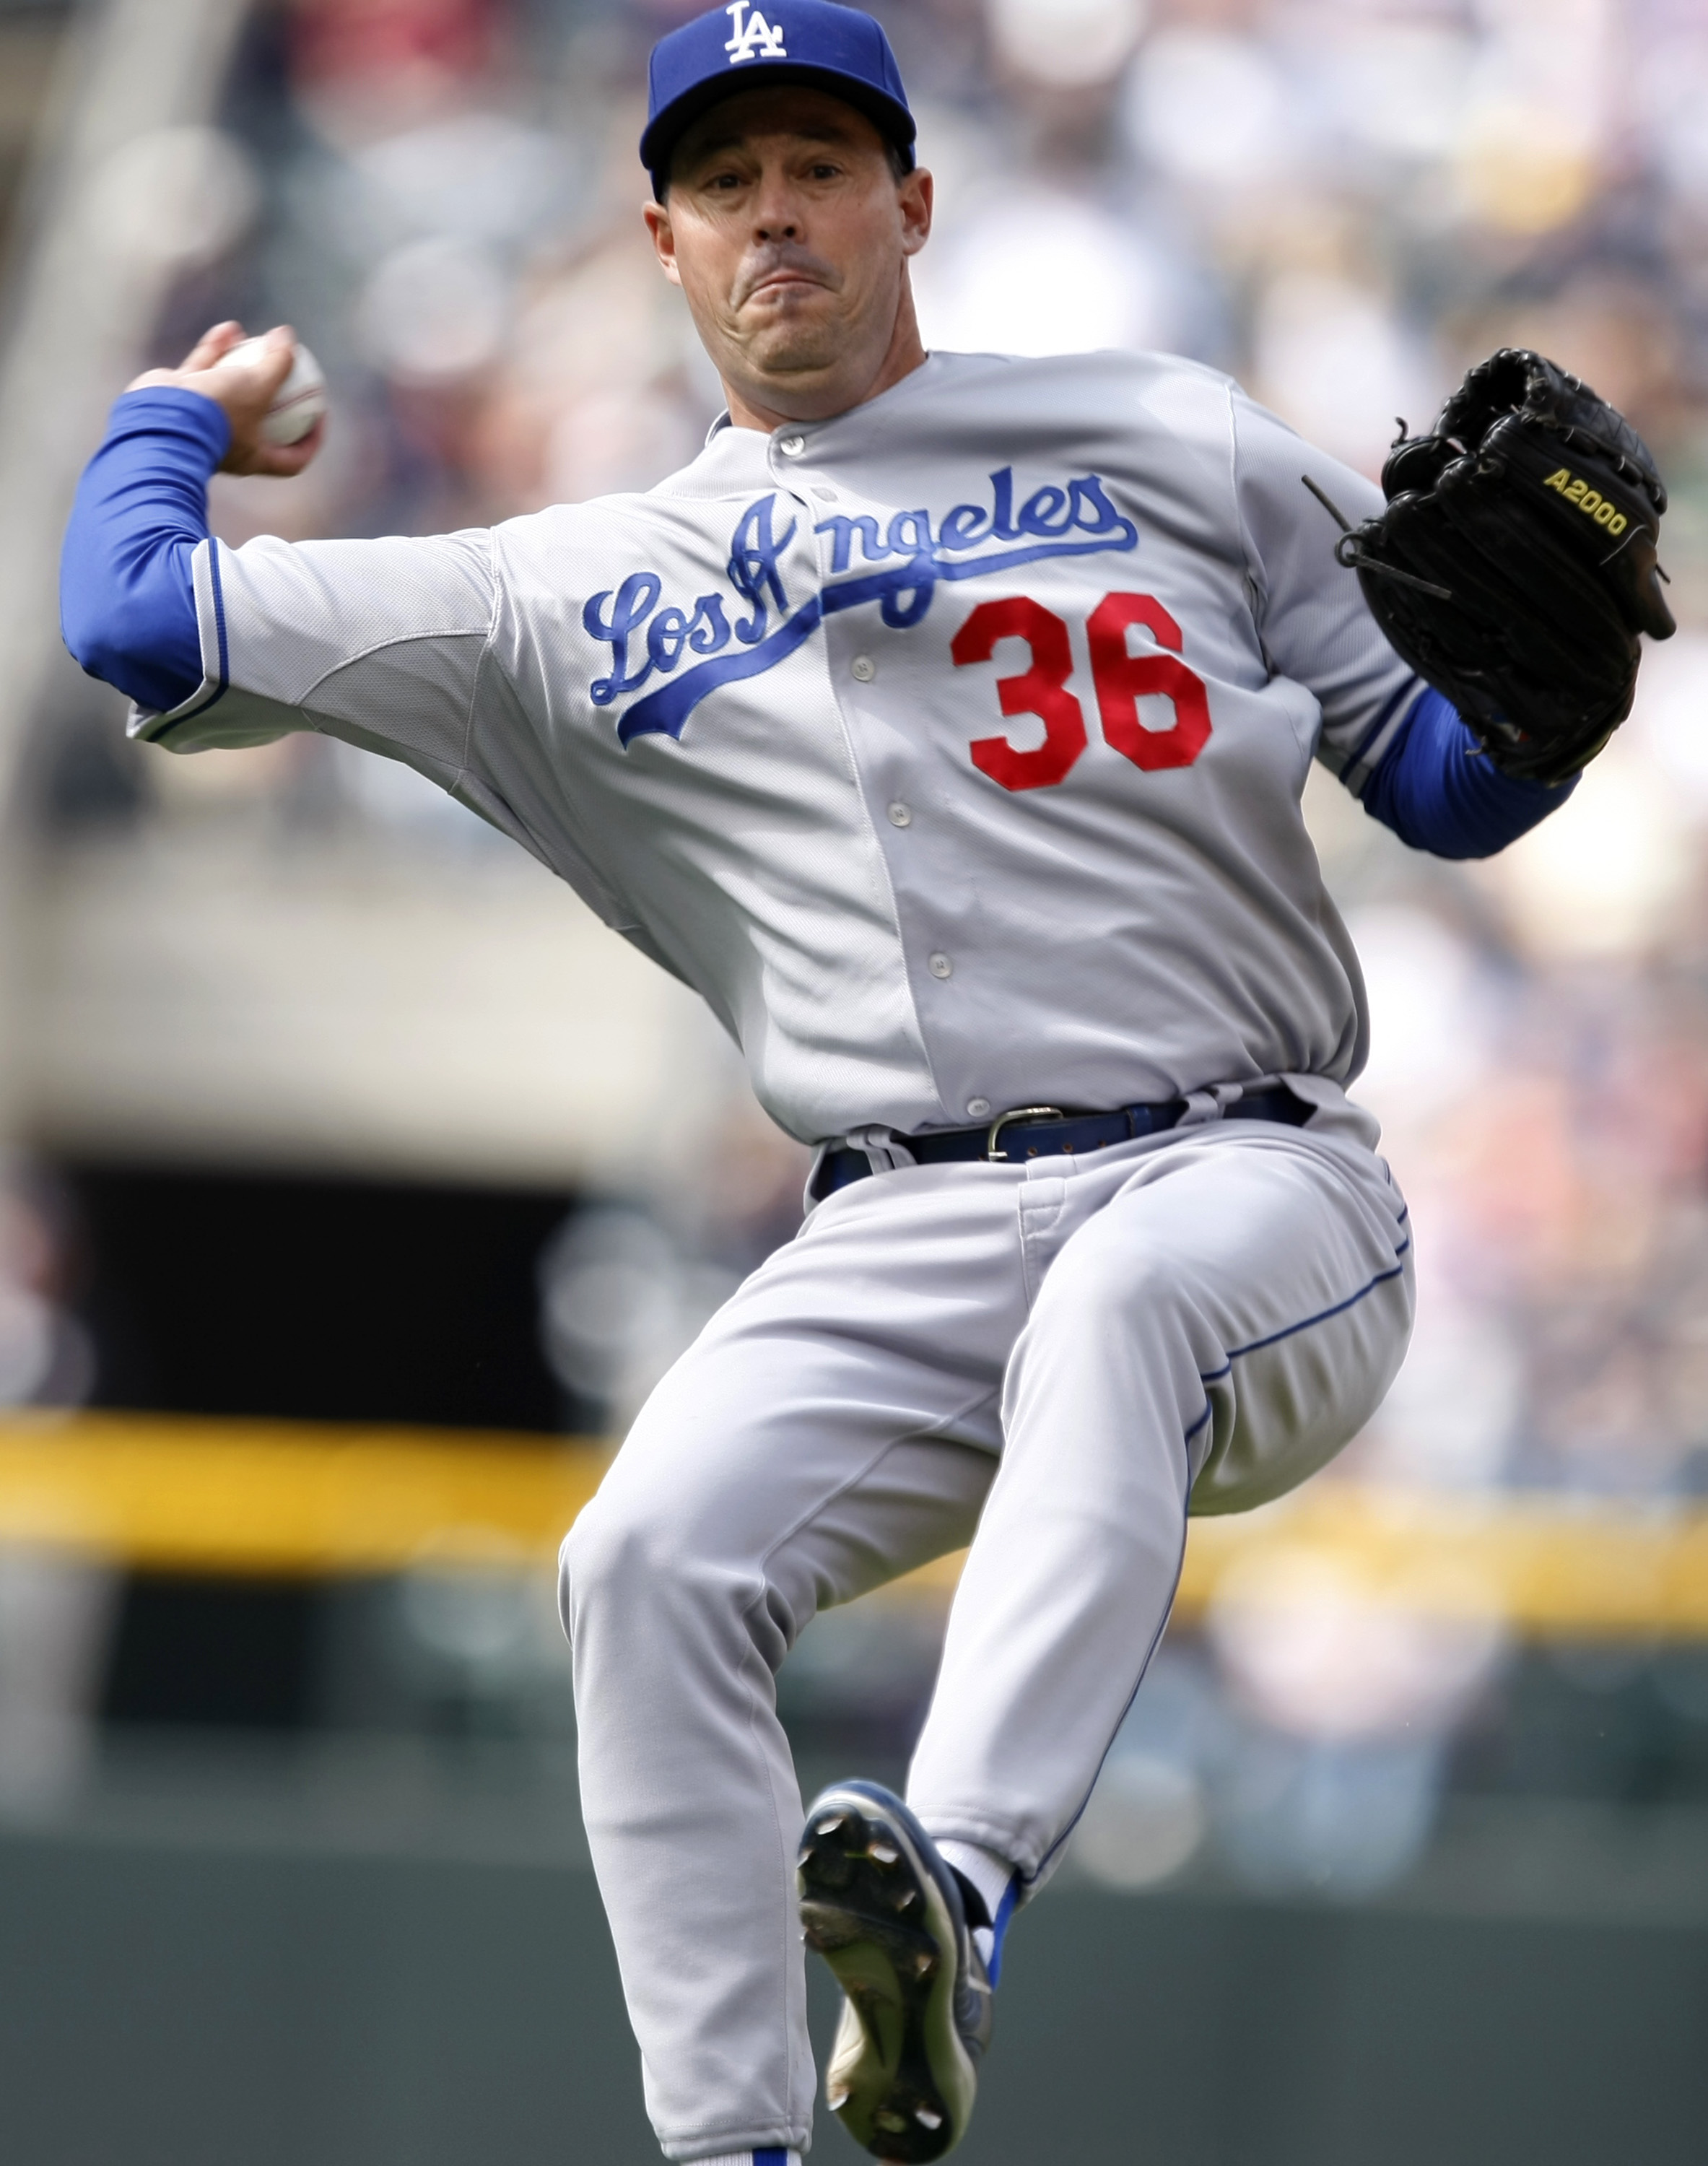 BEST DEFENSIVE PITCHER EVER?!?! Greg Maddux won EIGHTEEN Gold Gloves in his  career (won 13 straight) 